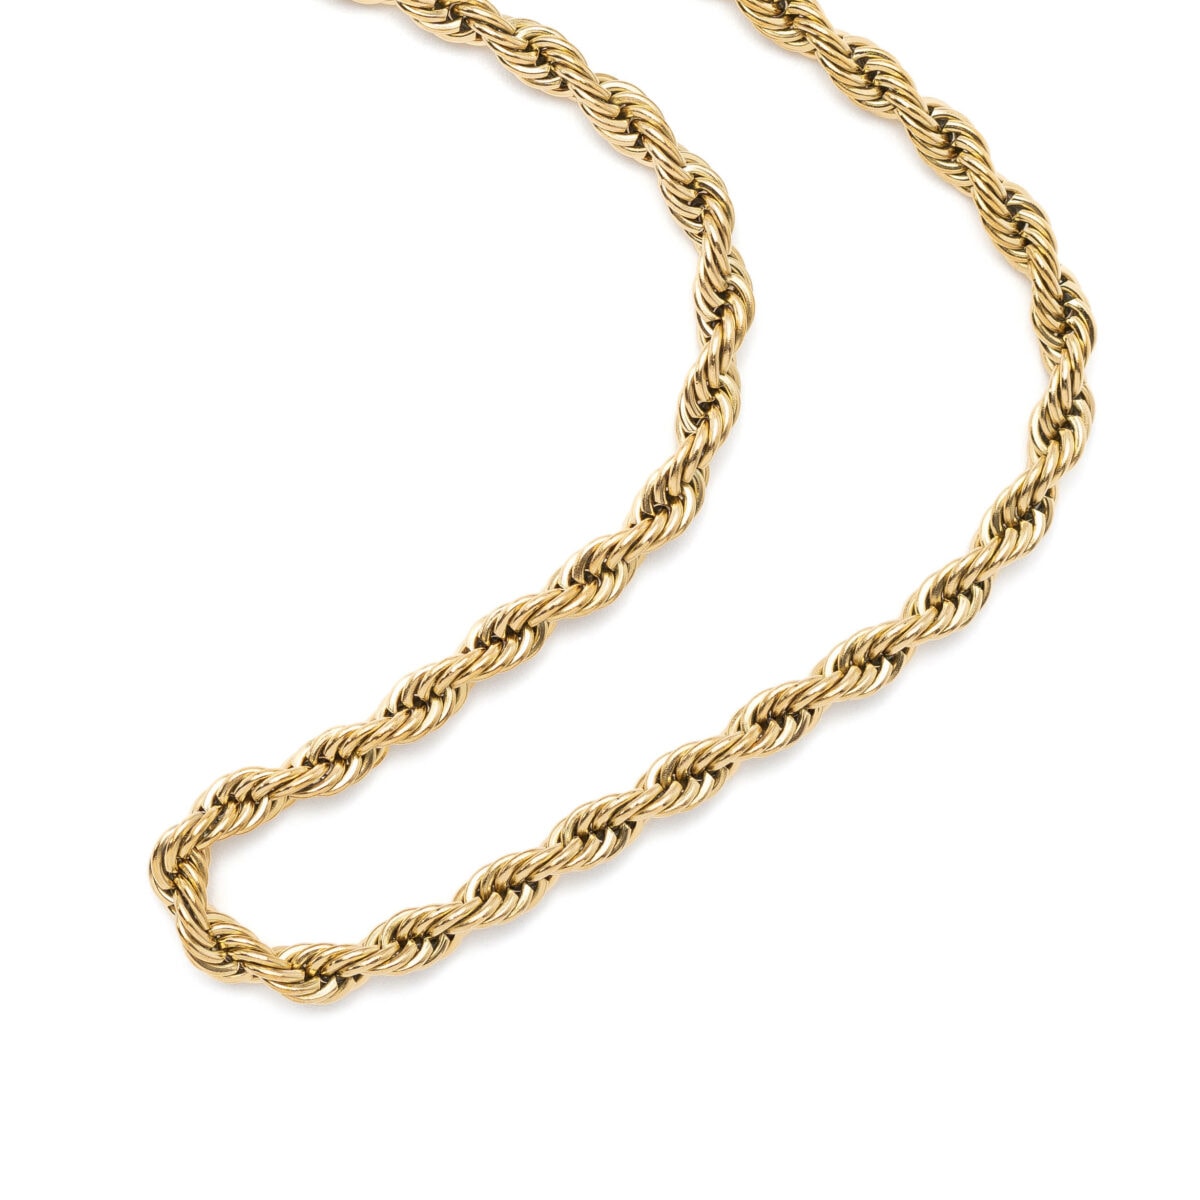 https://m.clubbella.co/product/bold-gold-rope-chain-necklace/ Resized (31 of 134)